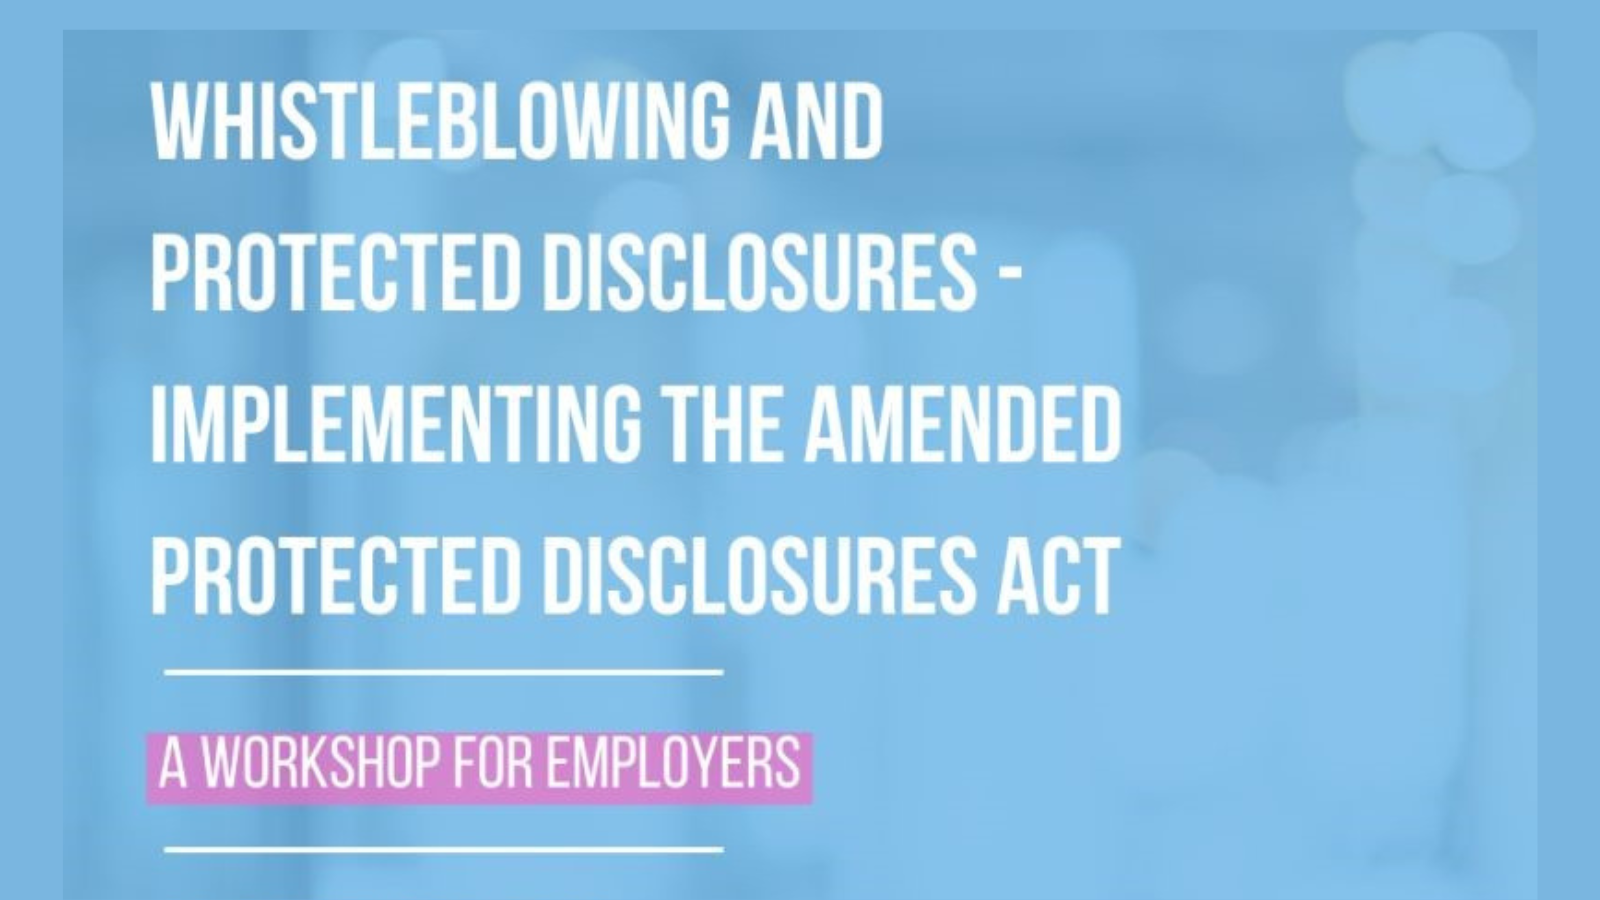 Whistleblowing and Protected Disclosures – Implementing the Amended Protected Disclosures Act